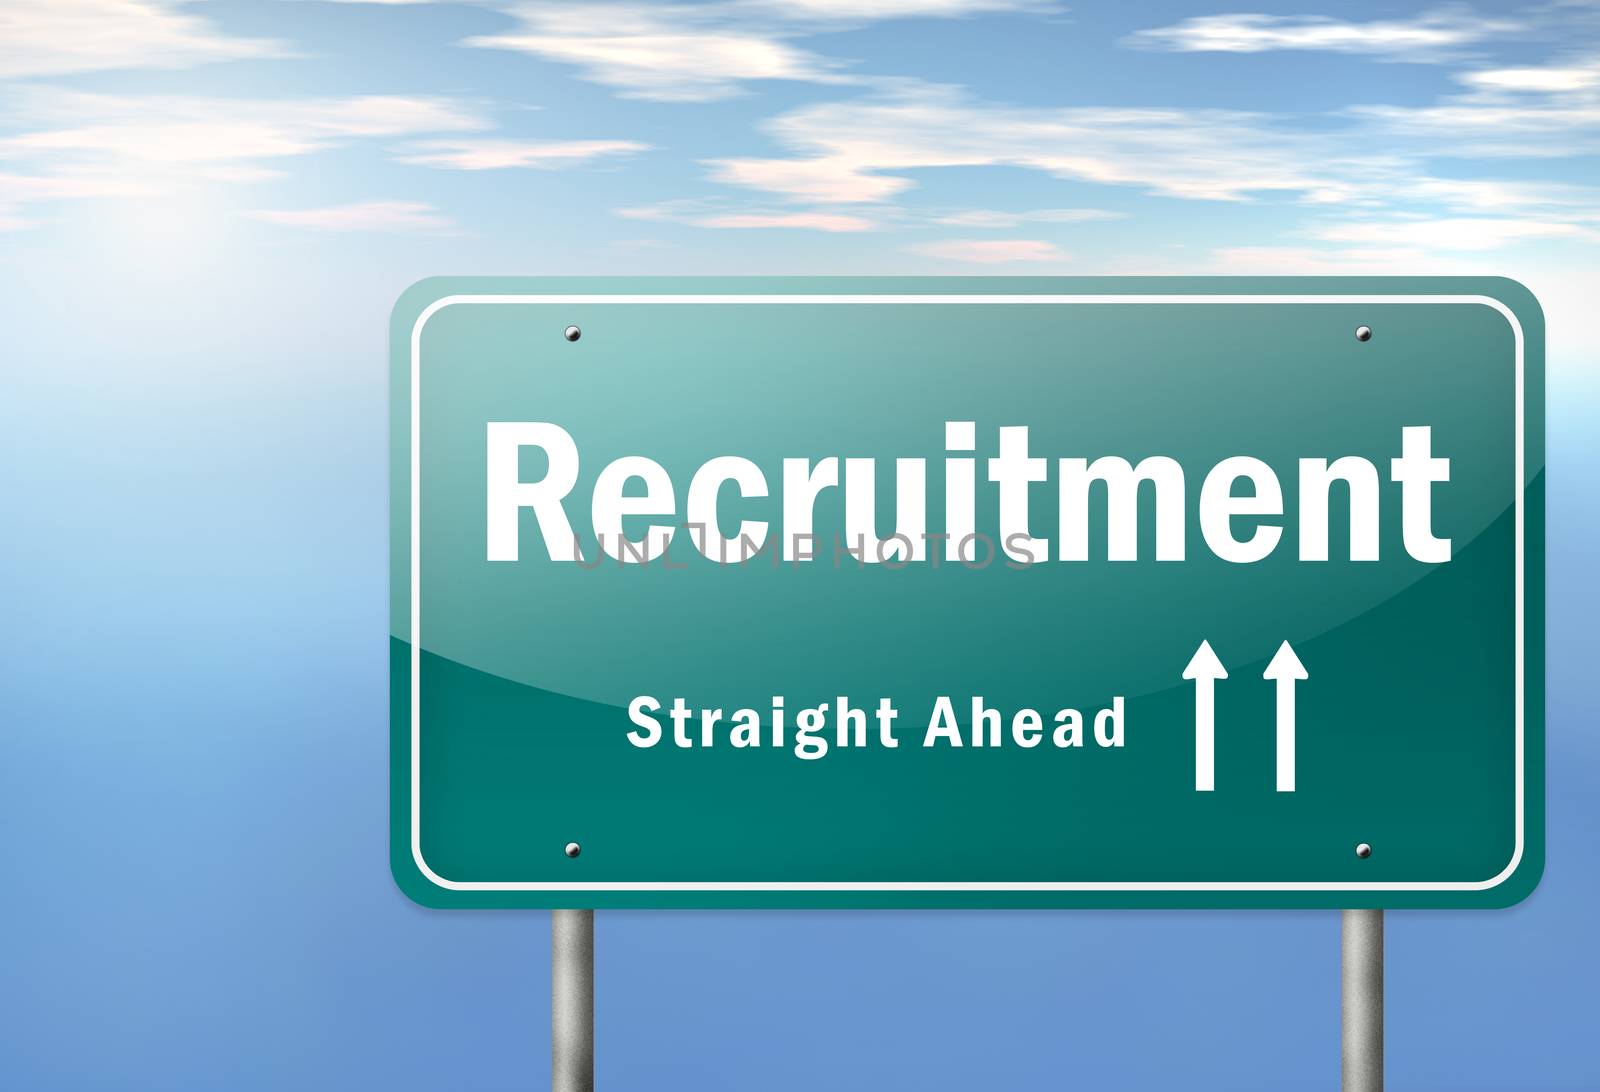 Highway Signpost "Recruitment" by mindscanner